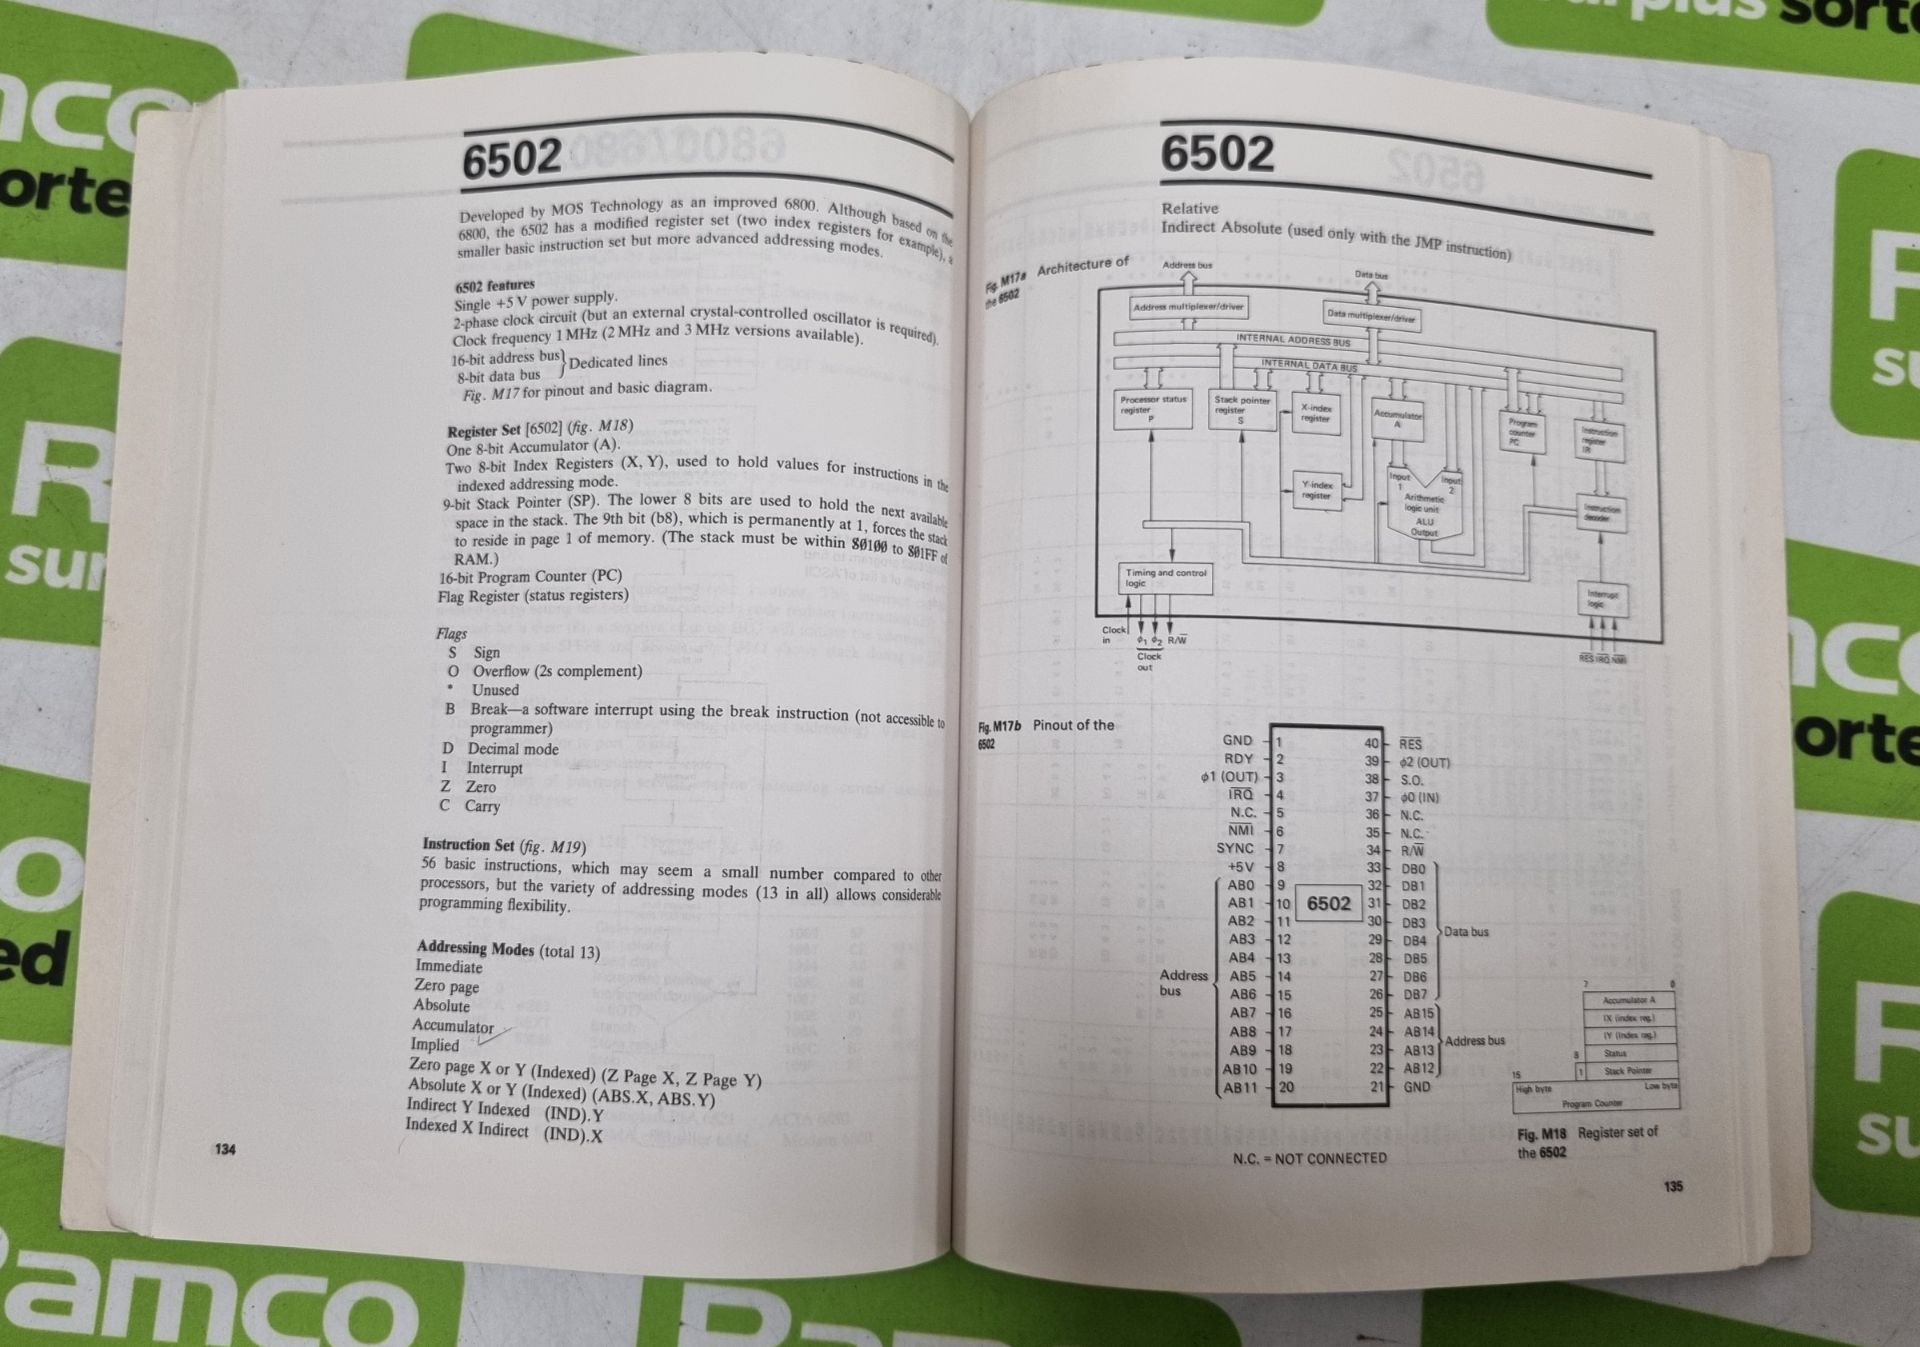 Your evening class: Basic Computing, Microprocessor Sourcebook, Scott Mueller's Upgrading and Repair - Image 11 of 11